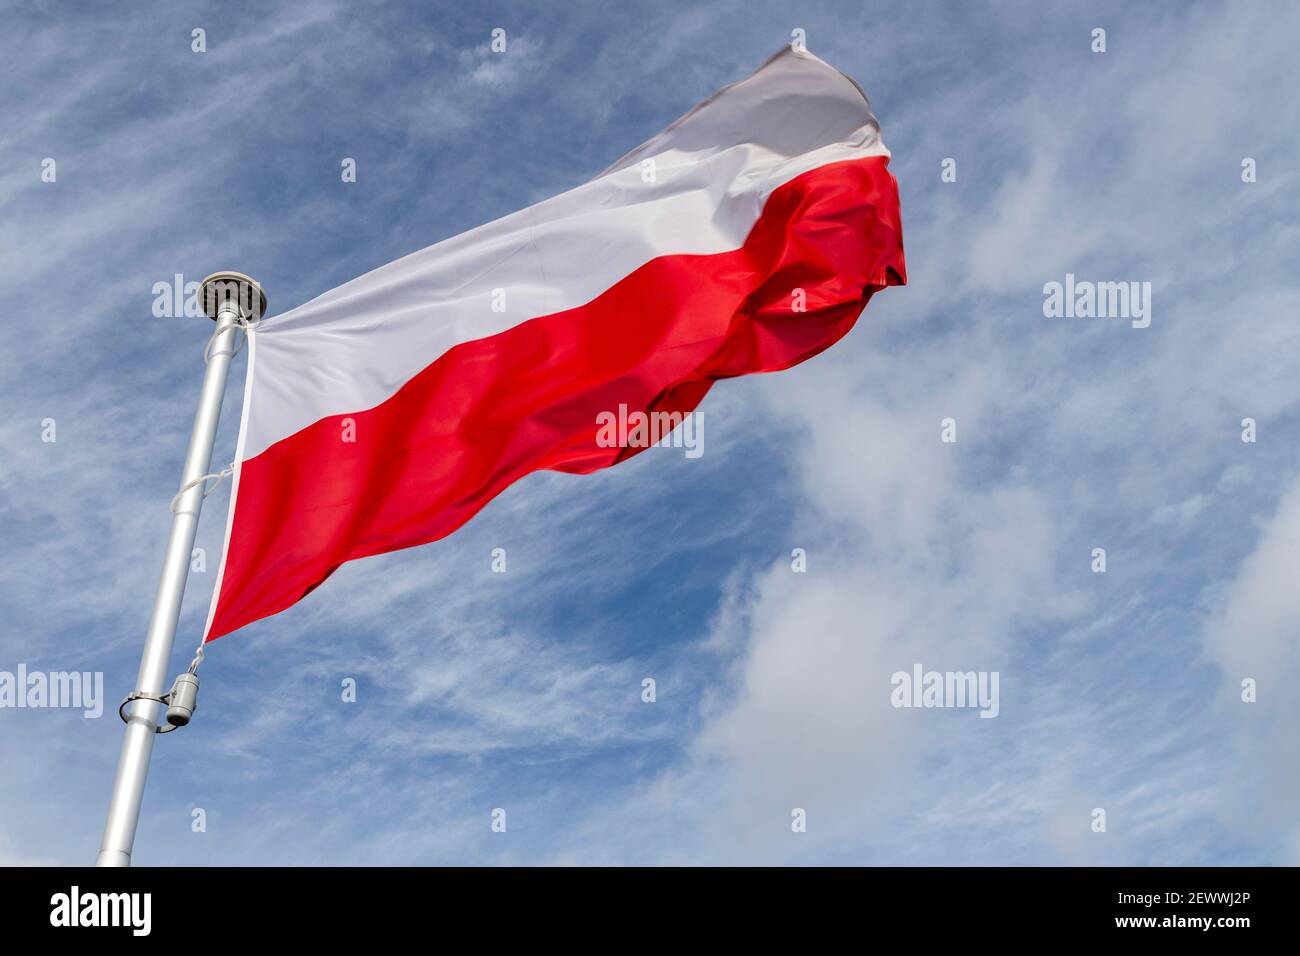 Polish flag on a background of the cloudy sky. National symbol of Poland on the mast. Summer season. Stock Photo